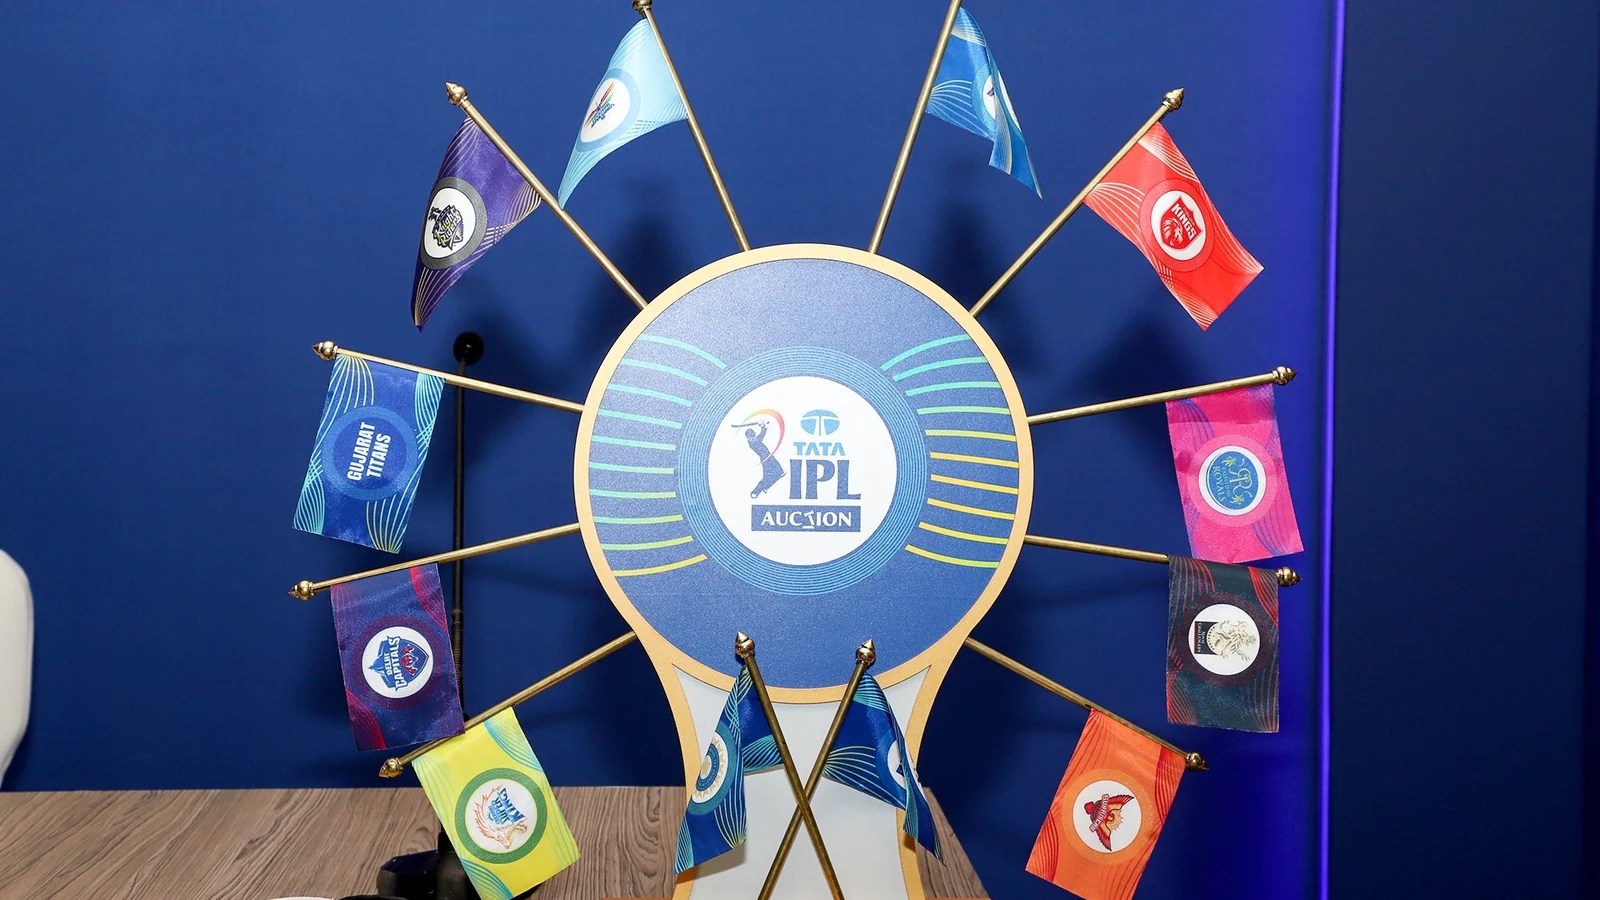 IPL 2022 RULE Change: BCCI introudces 2 BIG RULE CHANGES for IPL 2022, DRS Referrals increased to 2: Check Details